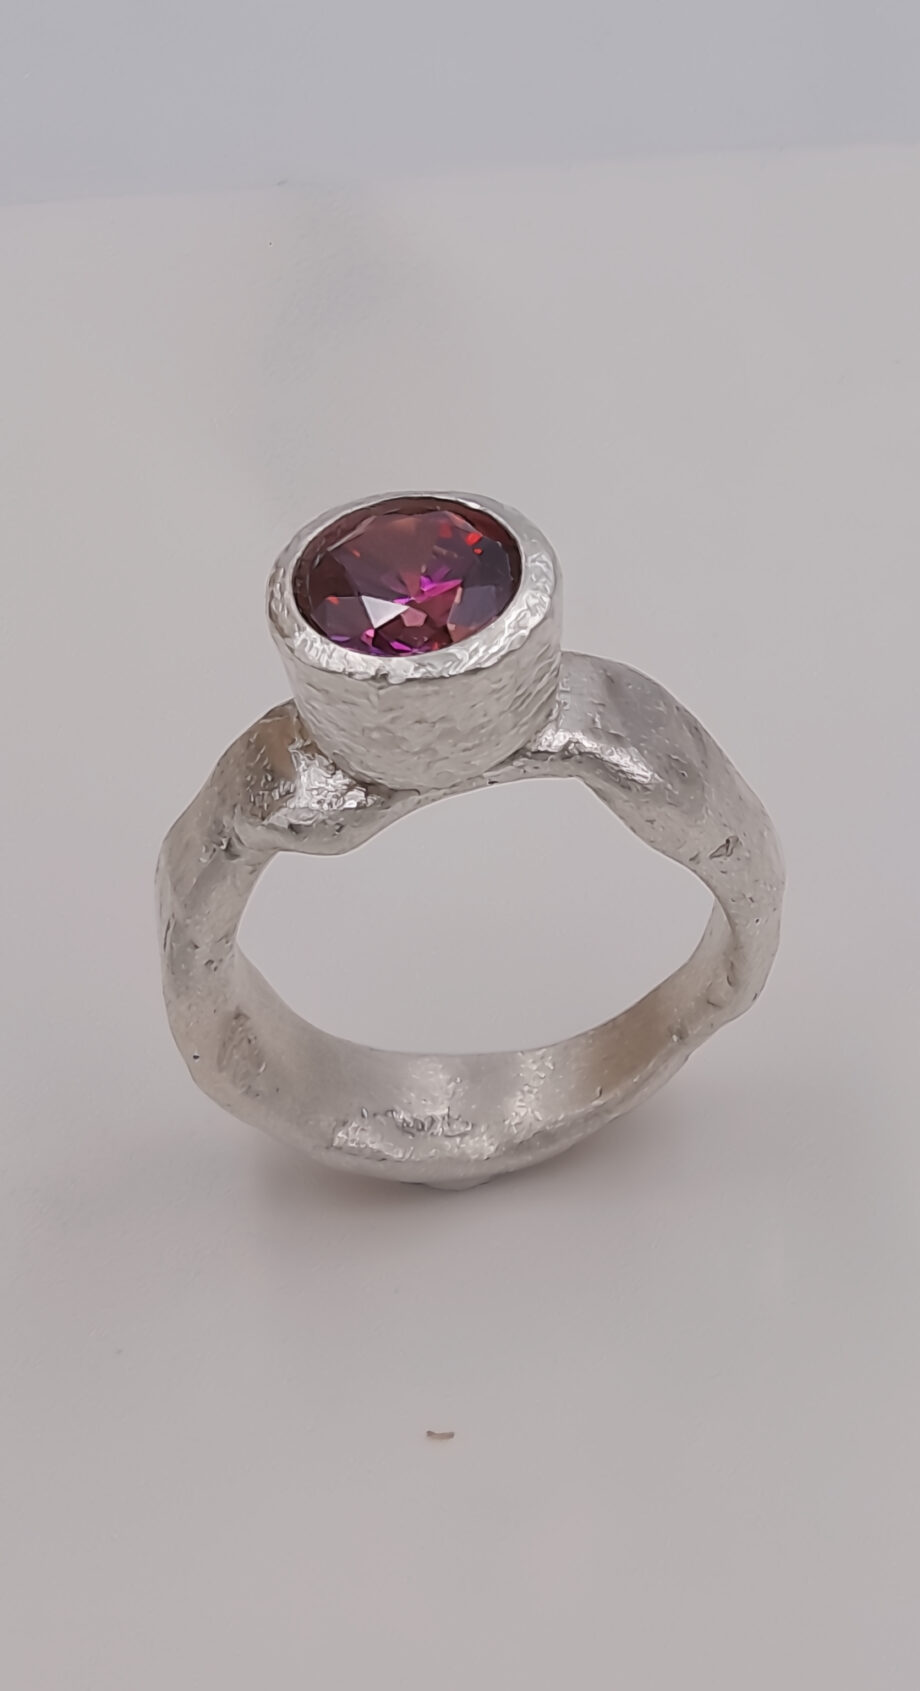 Forged Silver Ring with Pink Faceted Cubic Zirconia